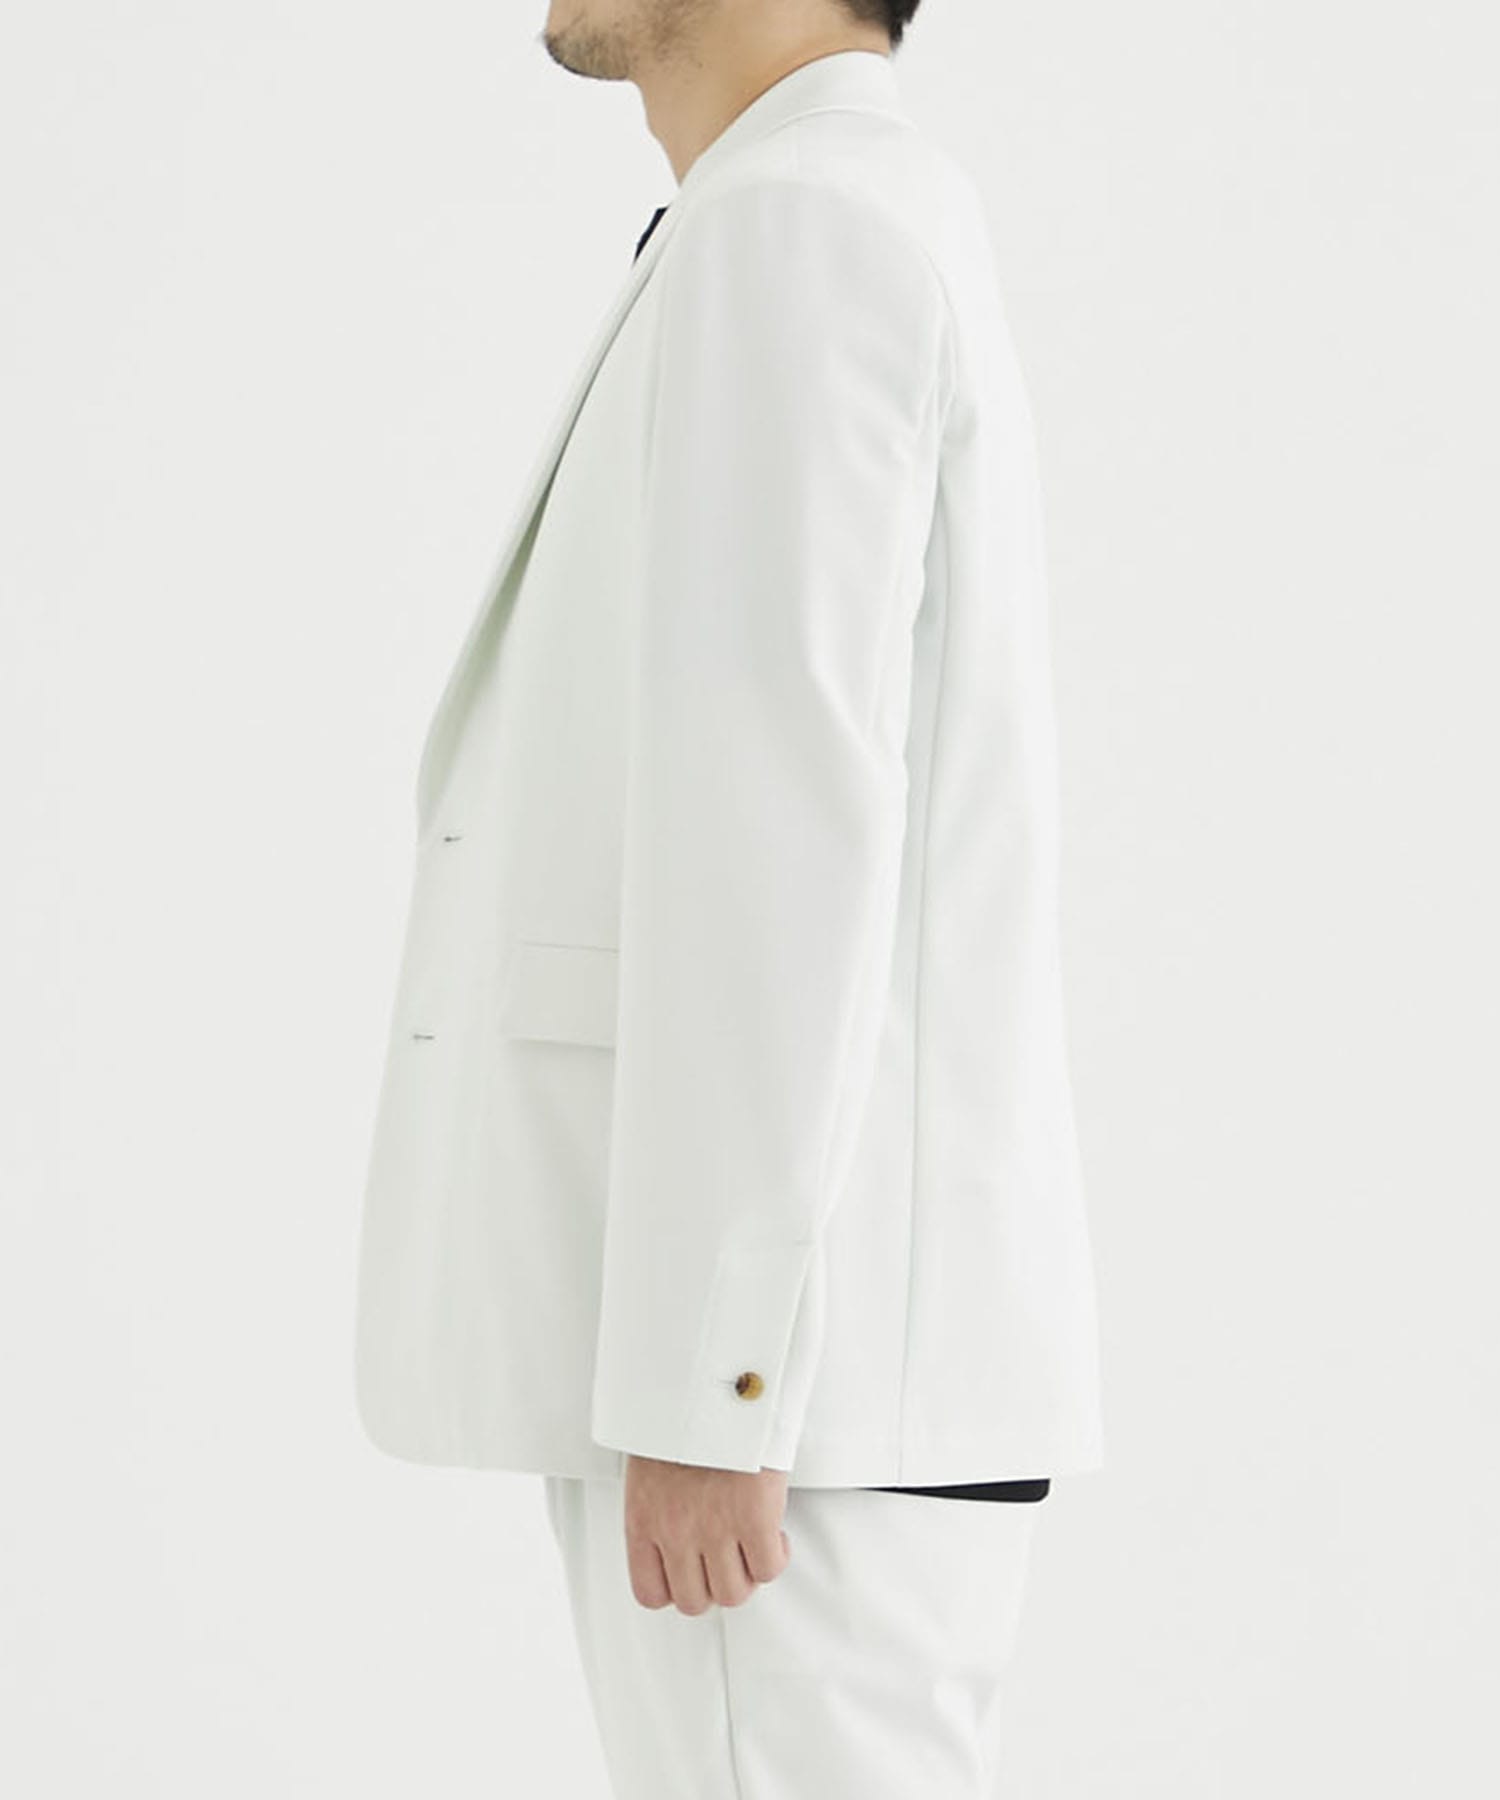 Washable High Function Jersey Shape Jacket(44 WHITE): THE TOKYO